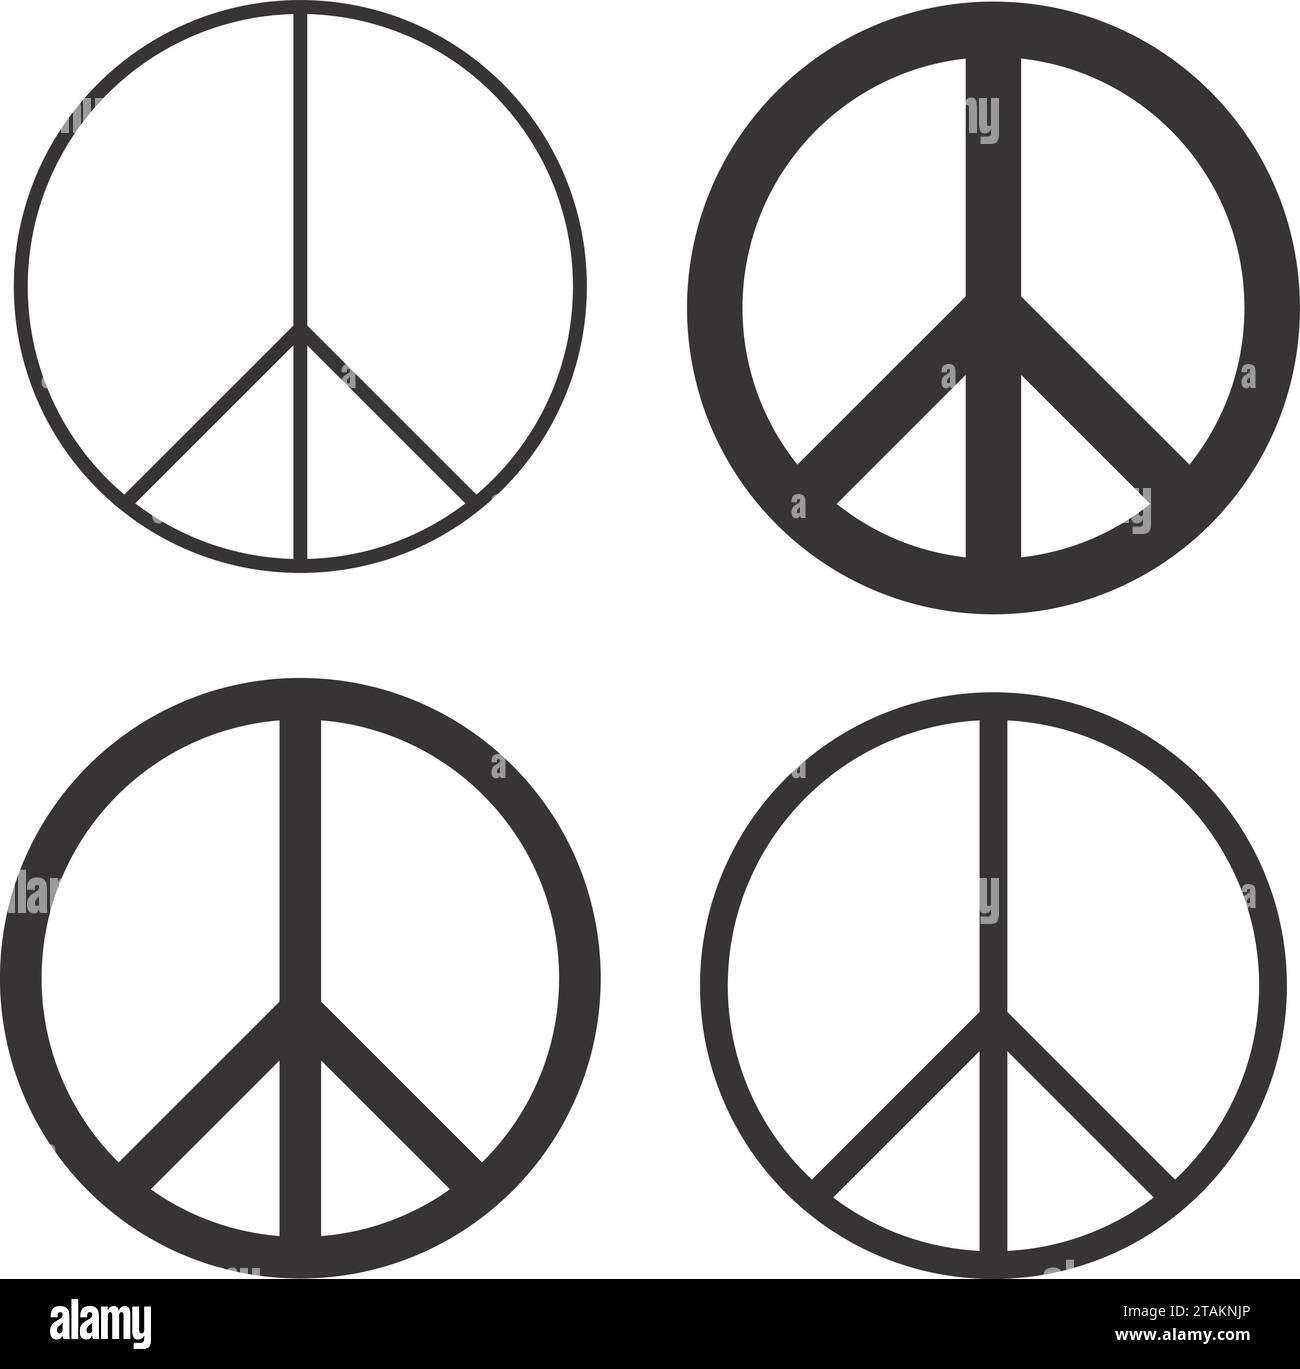 Peace symbol vector illustration. Black and white circle international peace icon for anti war or nuclear disarmament. american style vector. Stock Vector